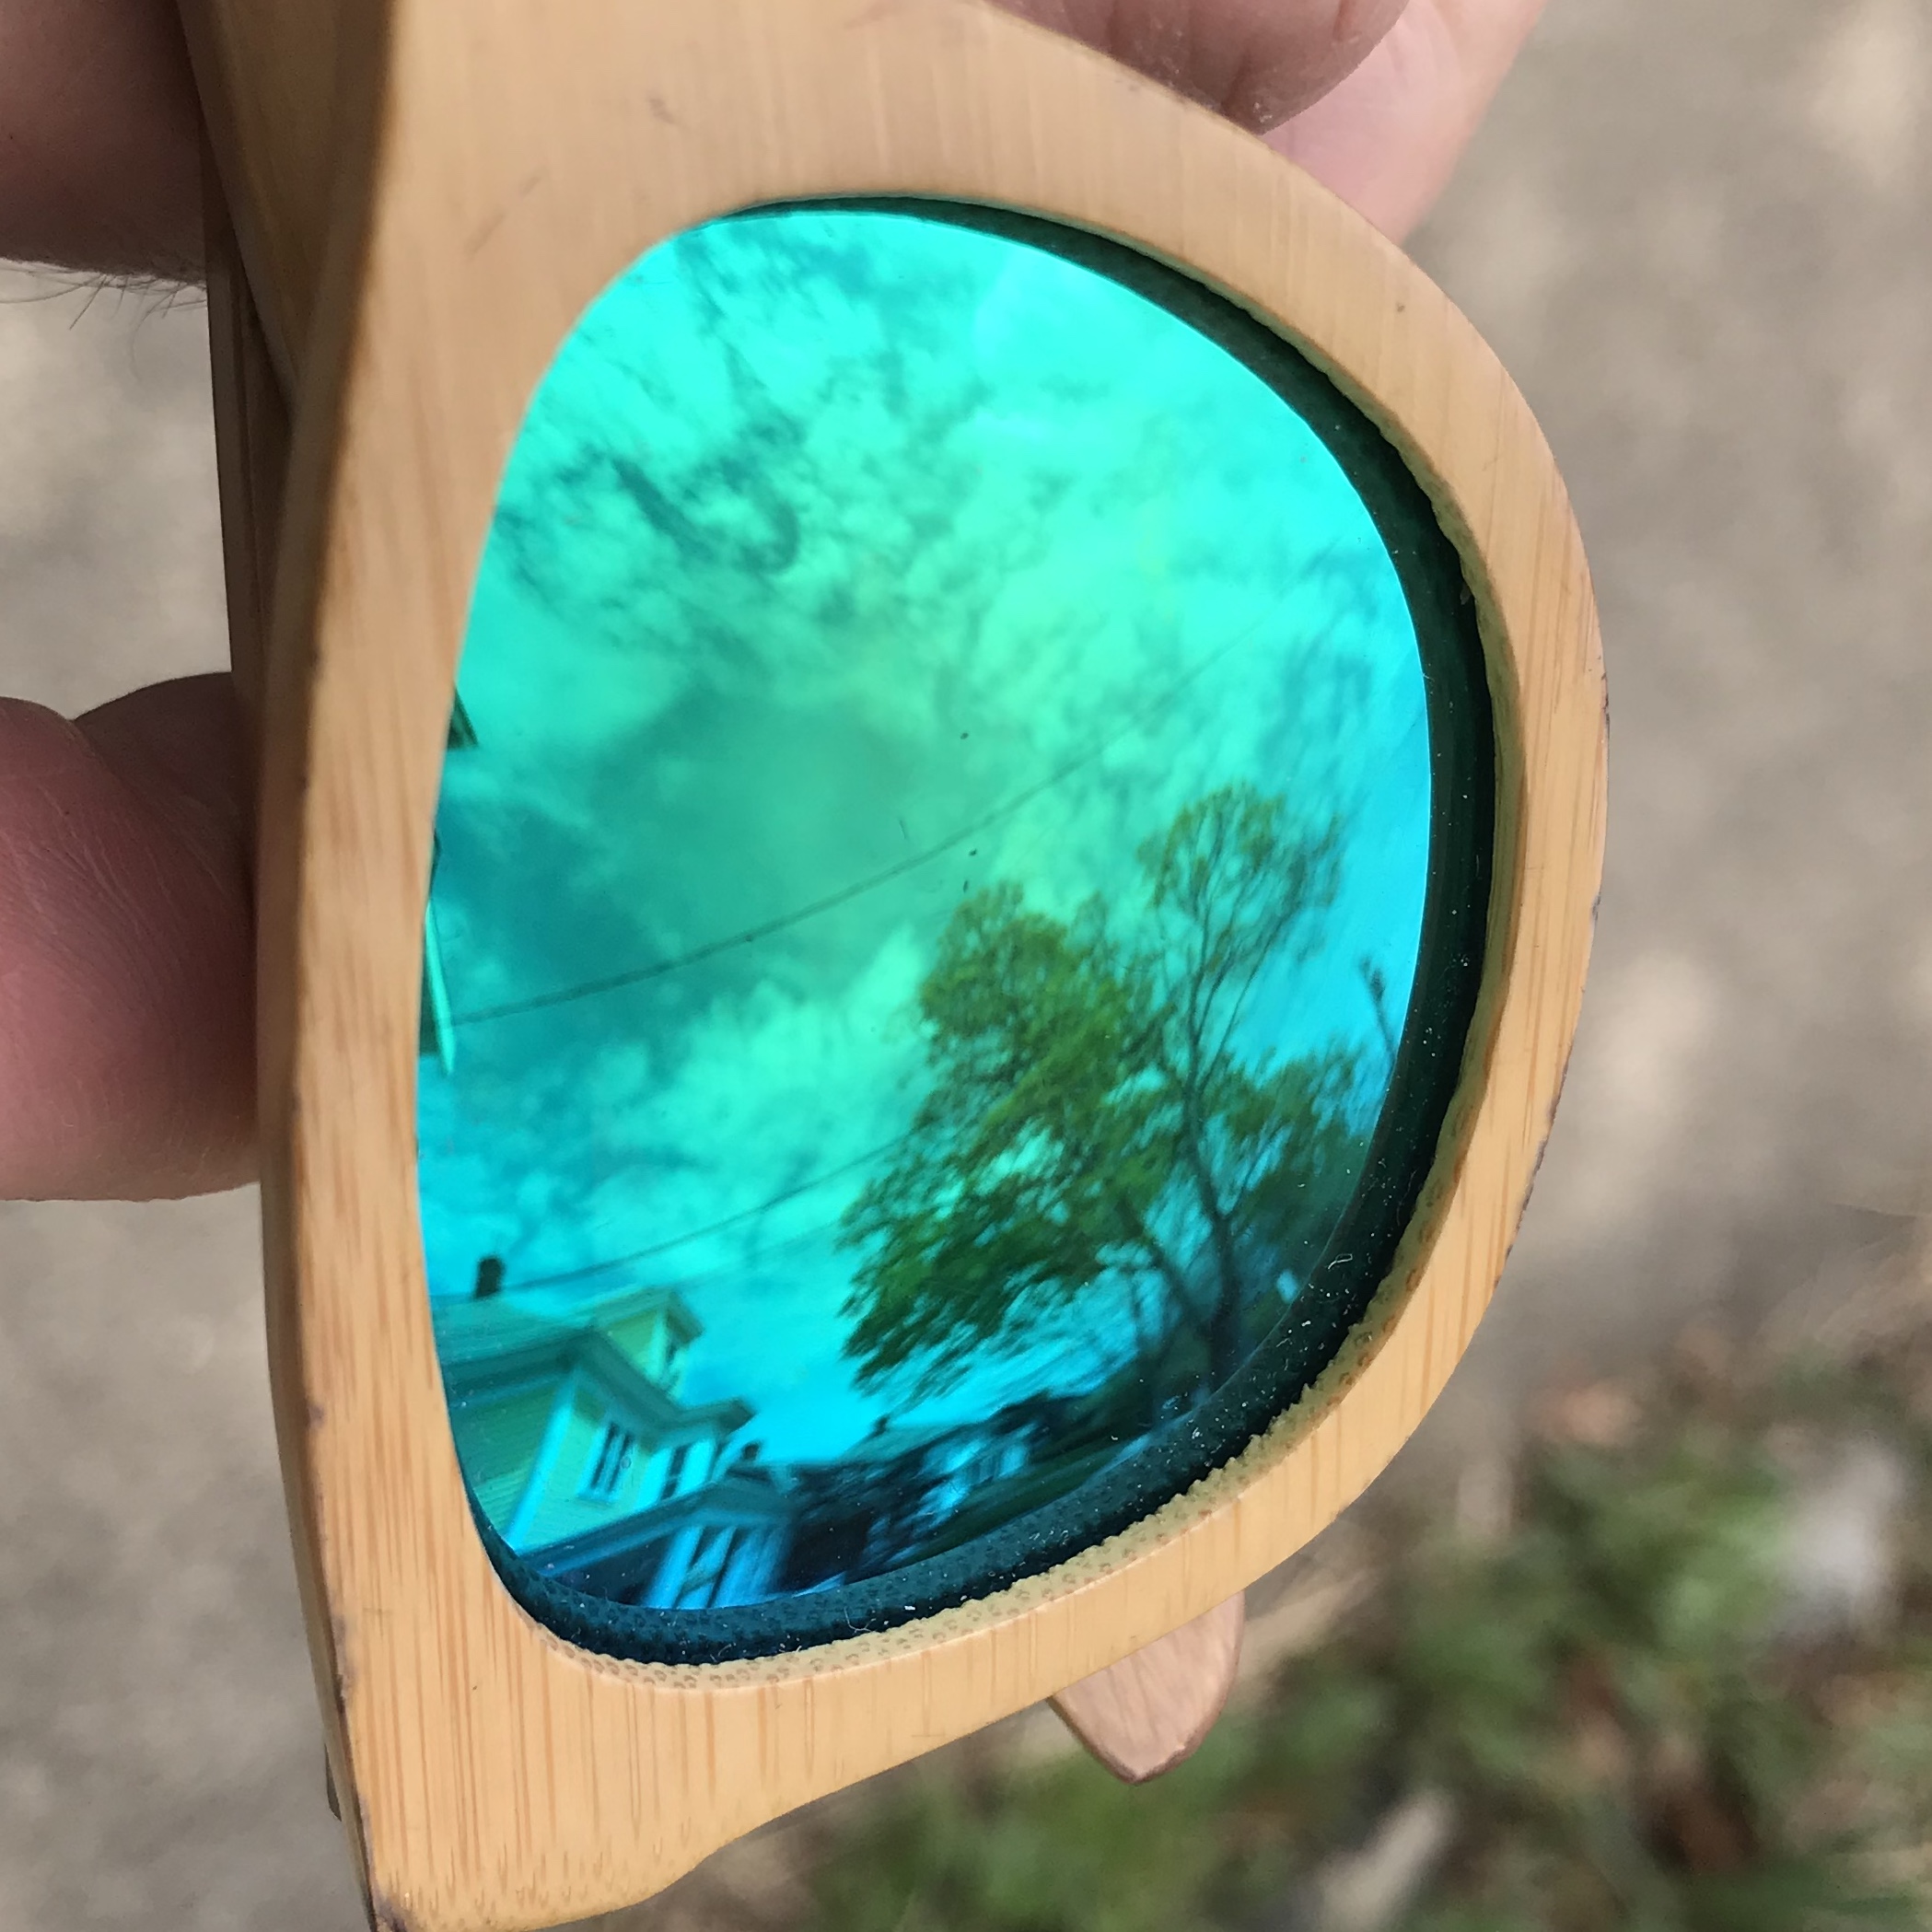 sunglasses with reflective lenses reflecting the sky, a tree, and a house